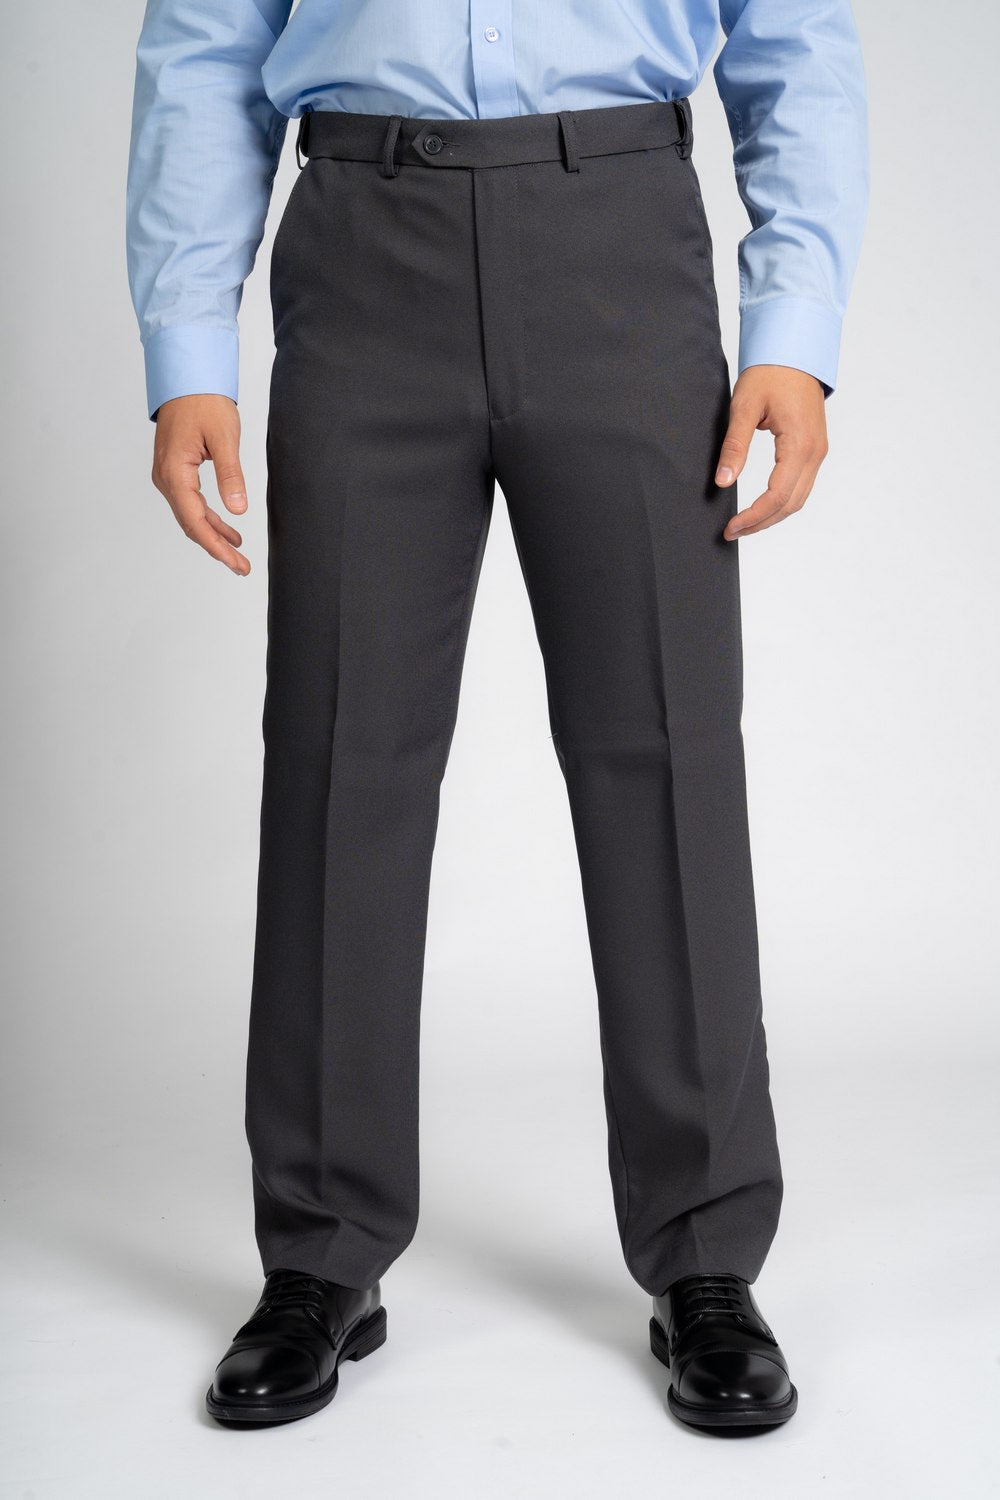 Expand-A-Band Thermal Lined Trouser In Grey – Blooms Menswear